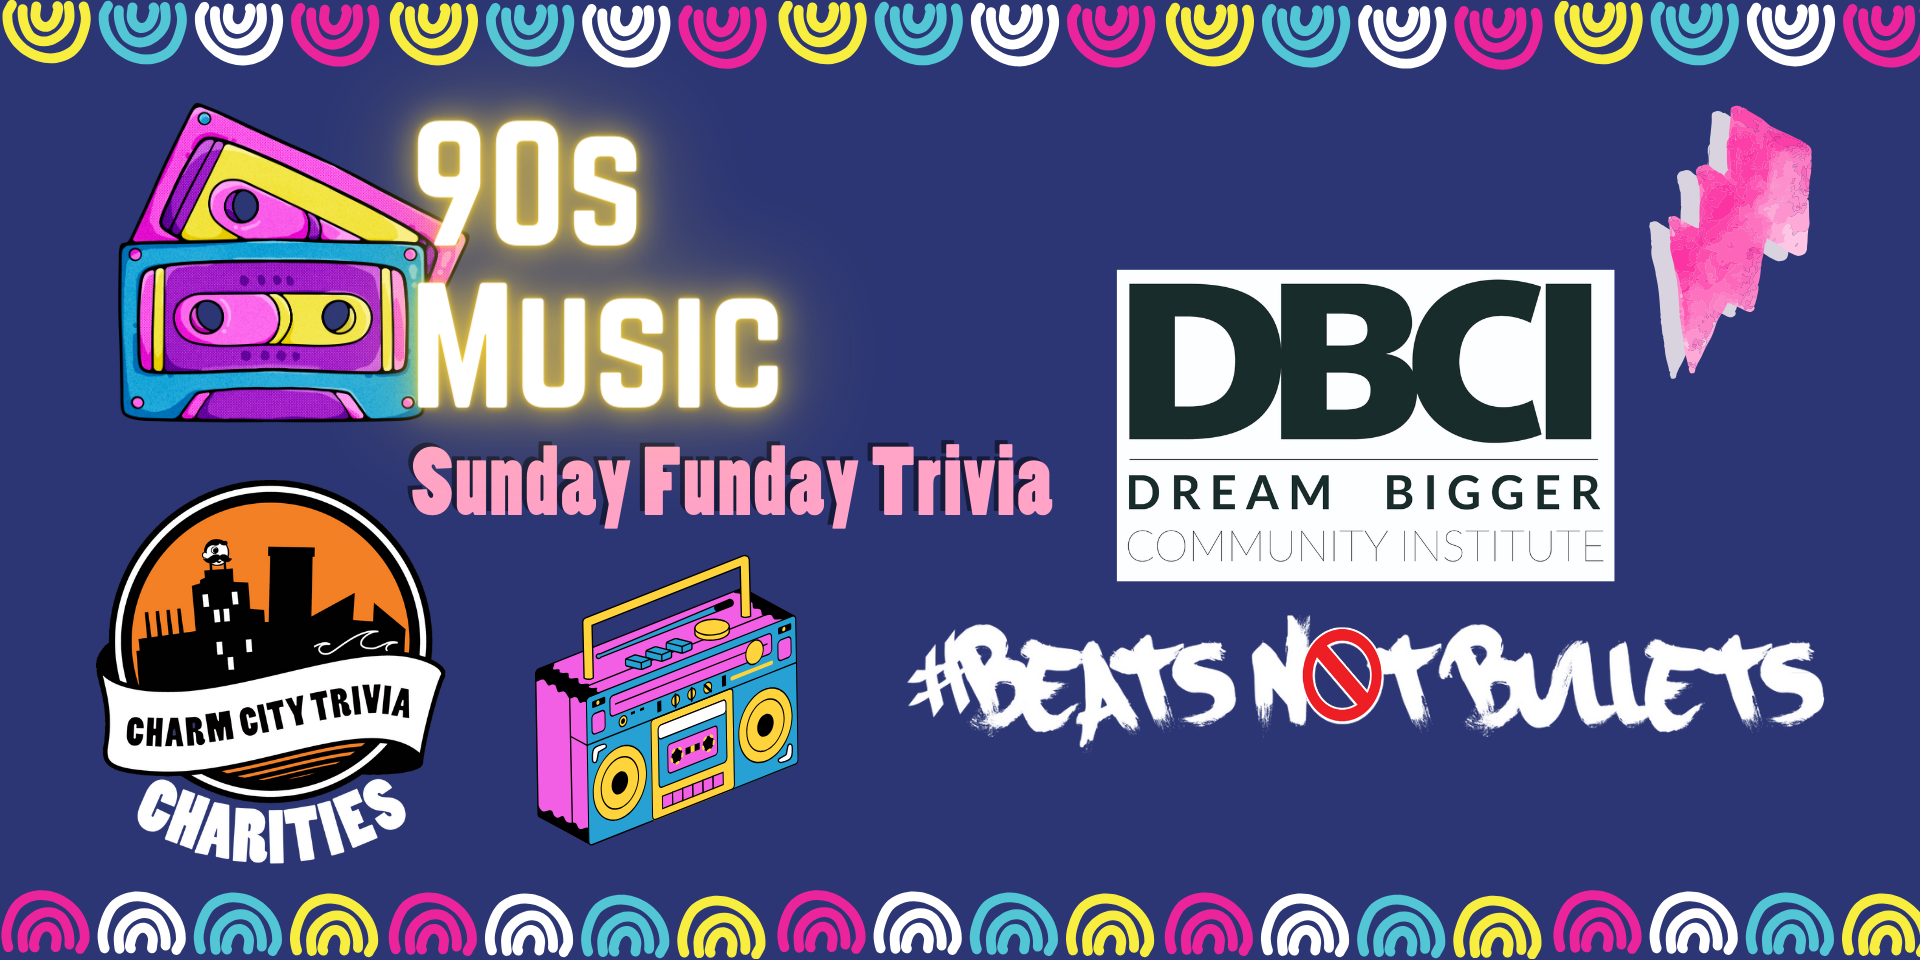 a dark blue background with a colorful border, the Charm City Trivia Charities logo, the Dream Bigger Community Institute logo, the Beats Not Bullets logo, the words "90s Music" in neon yellow, colorful cassette tapes, a colorful boom box, a pink lightning bolt, and pink text. The text reads: Sunday Funday Trivia